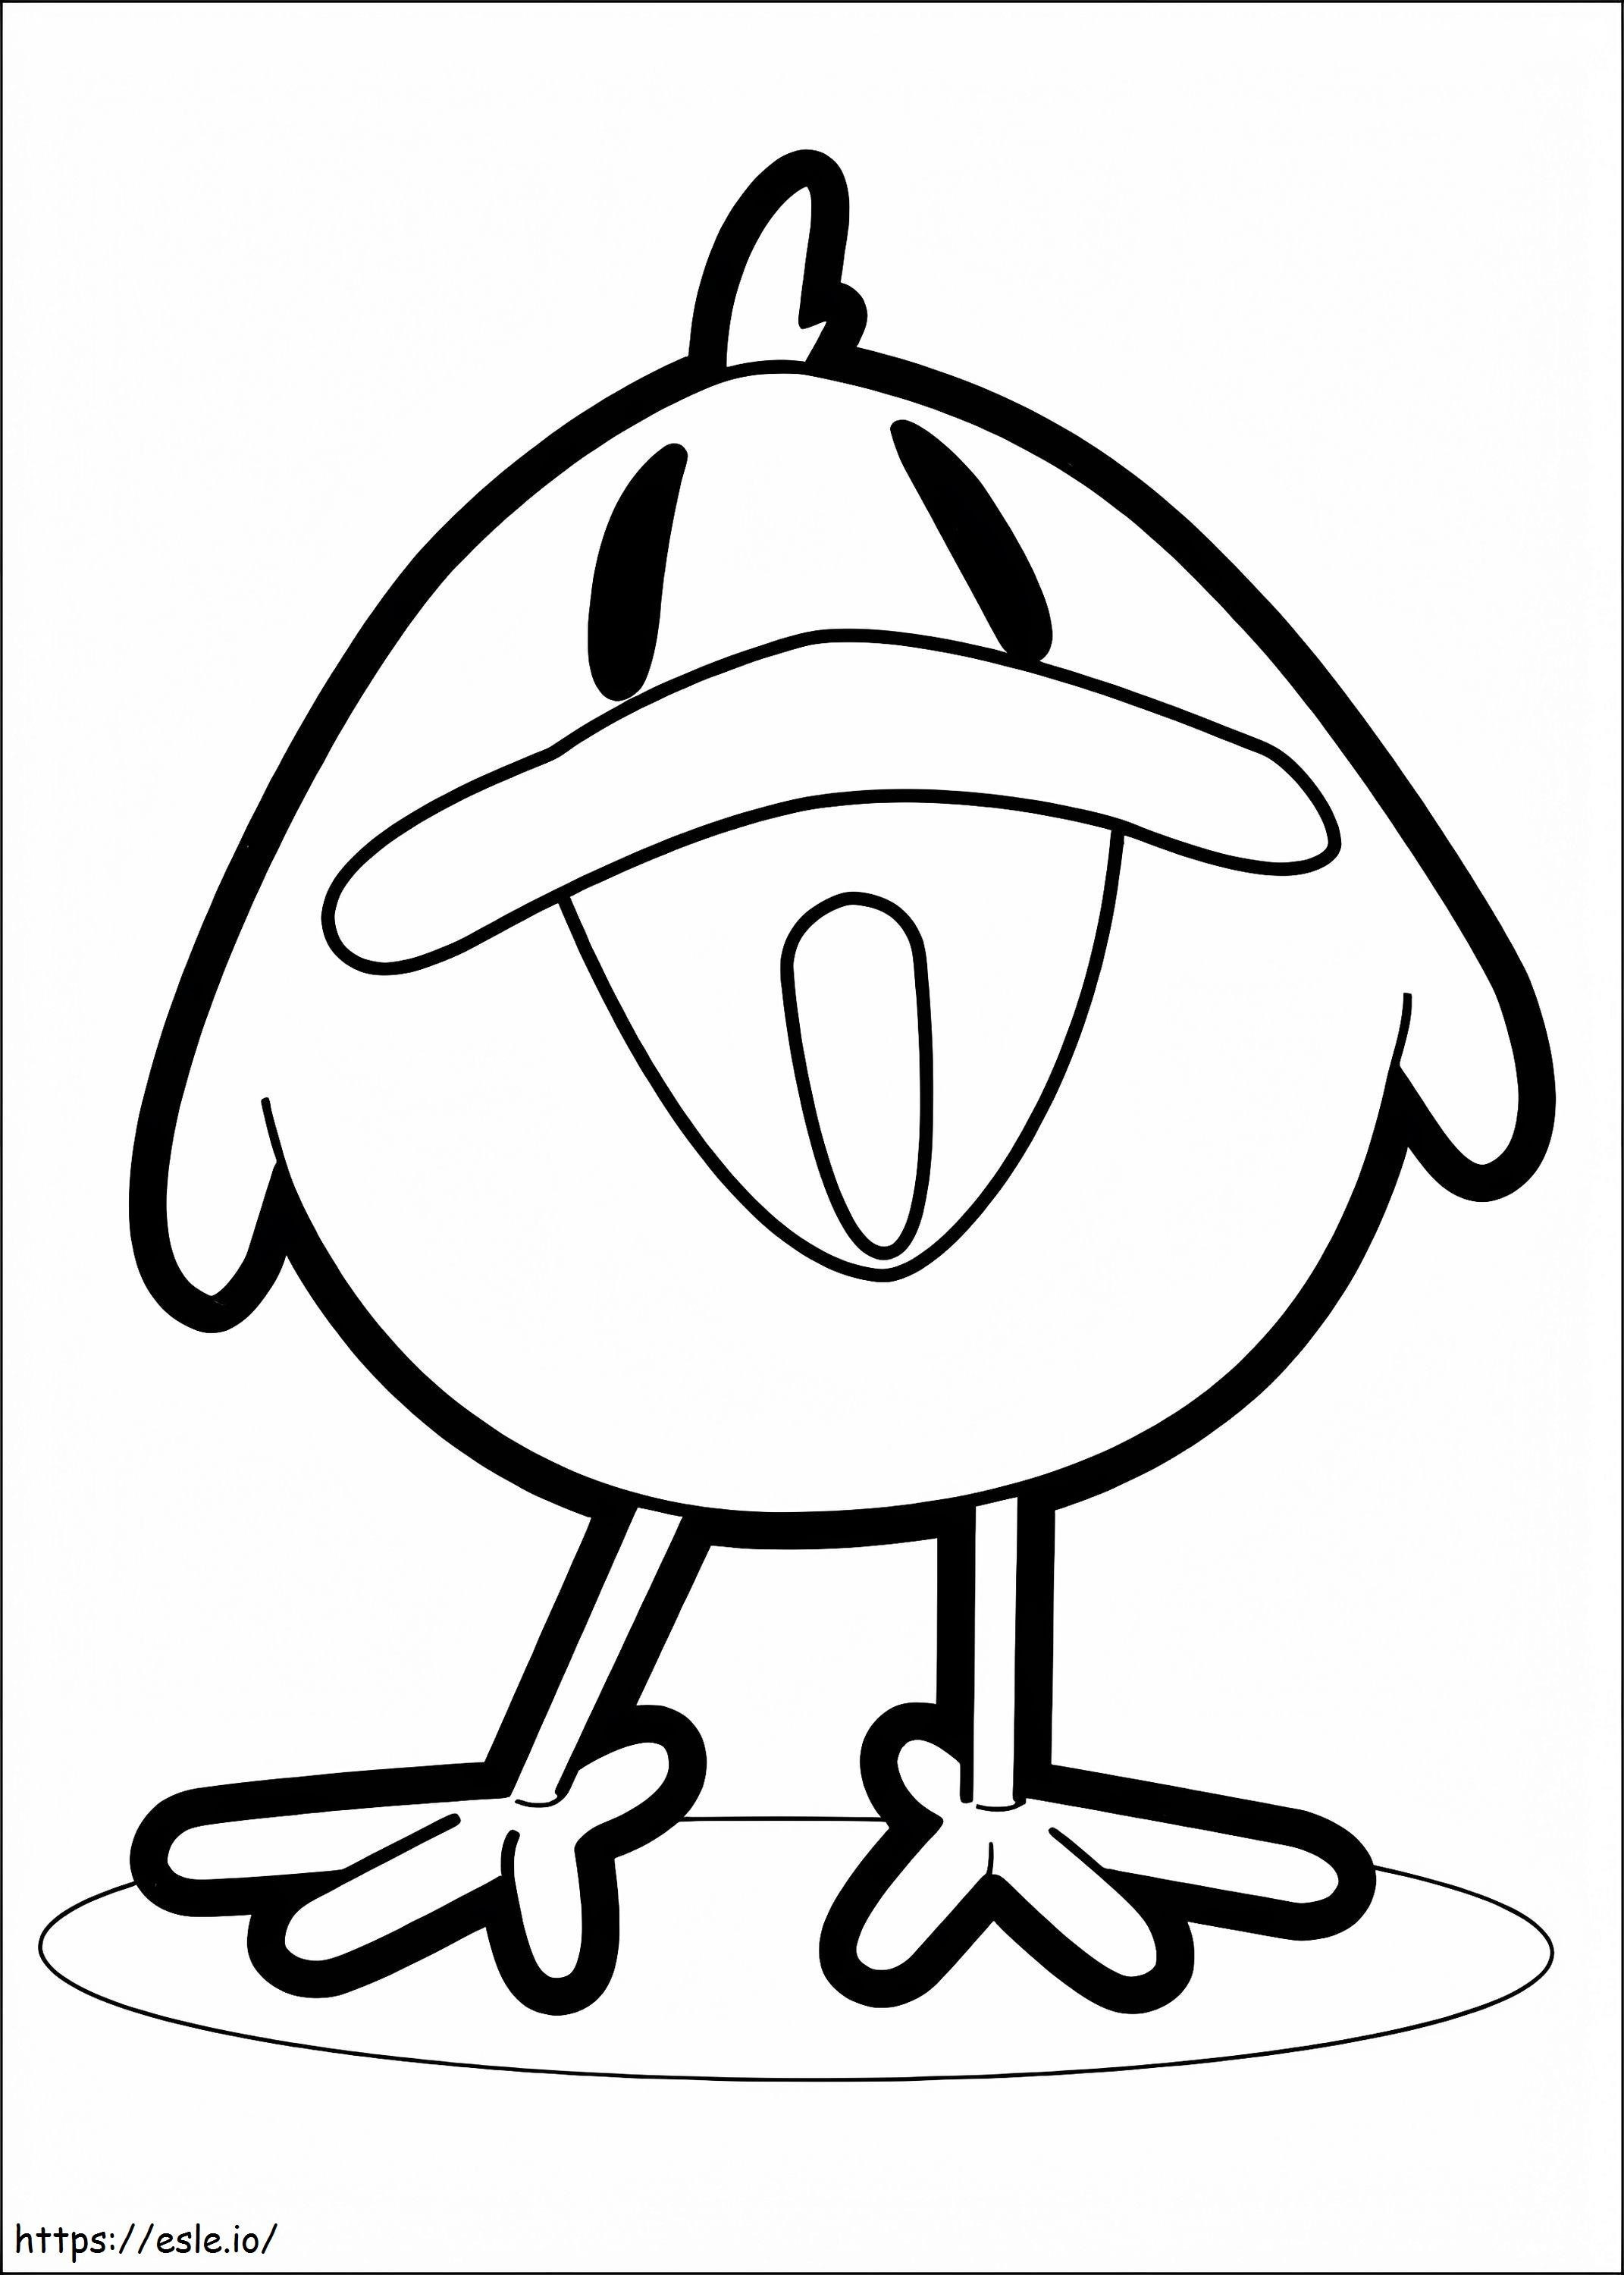 Baby Bird From Pocoyo coloring page